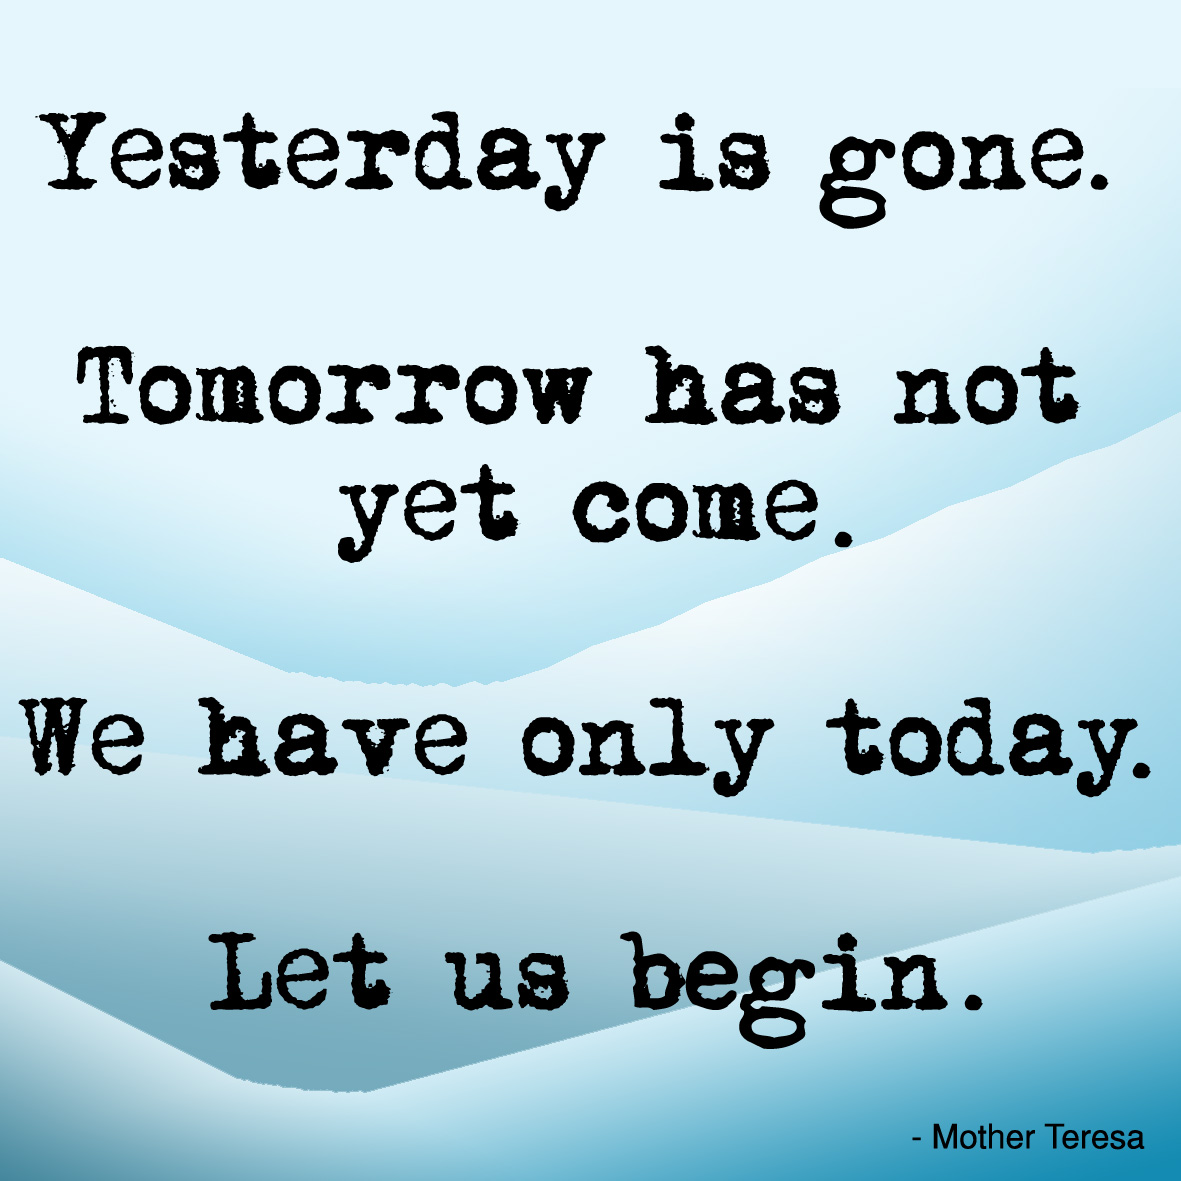 Yesterday is gone tomorrow. Not yet. Let us begin. Are we coming yet. Yesterday is not today